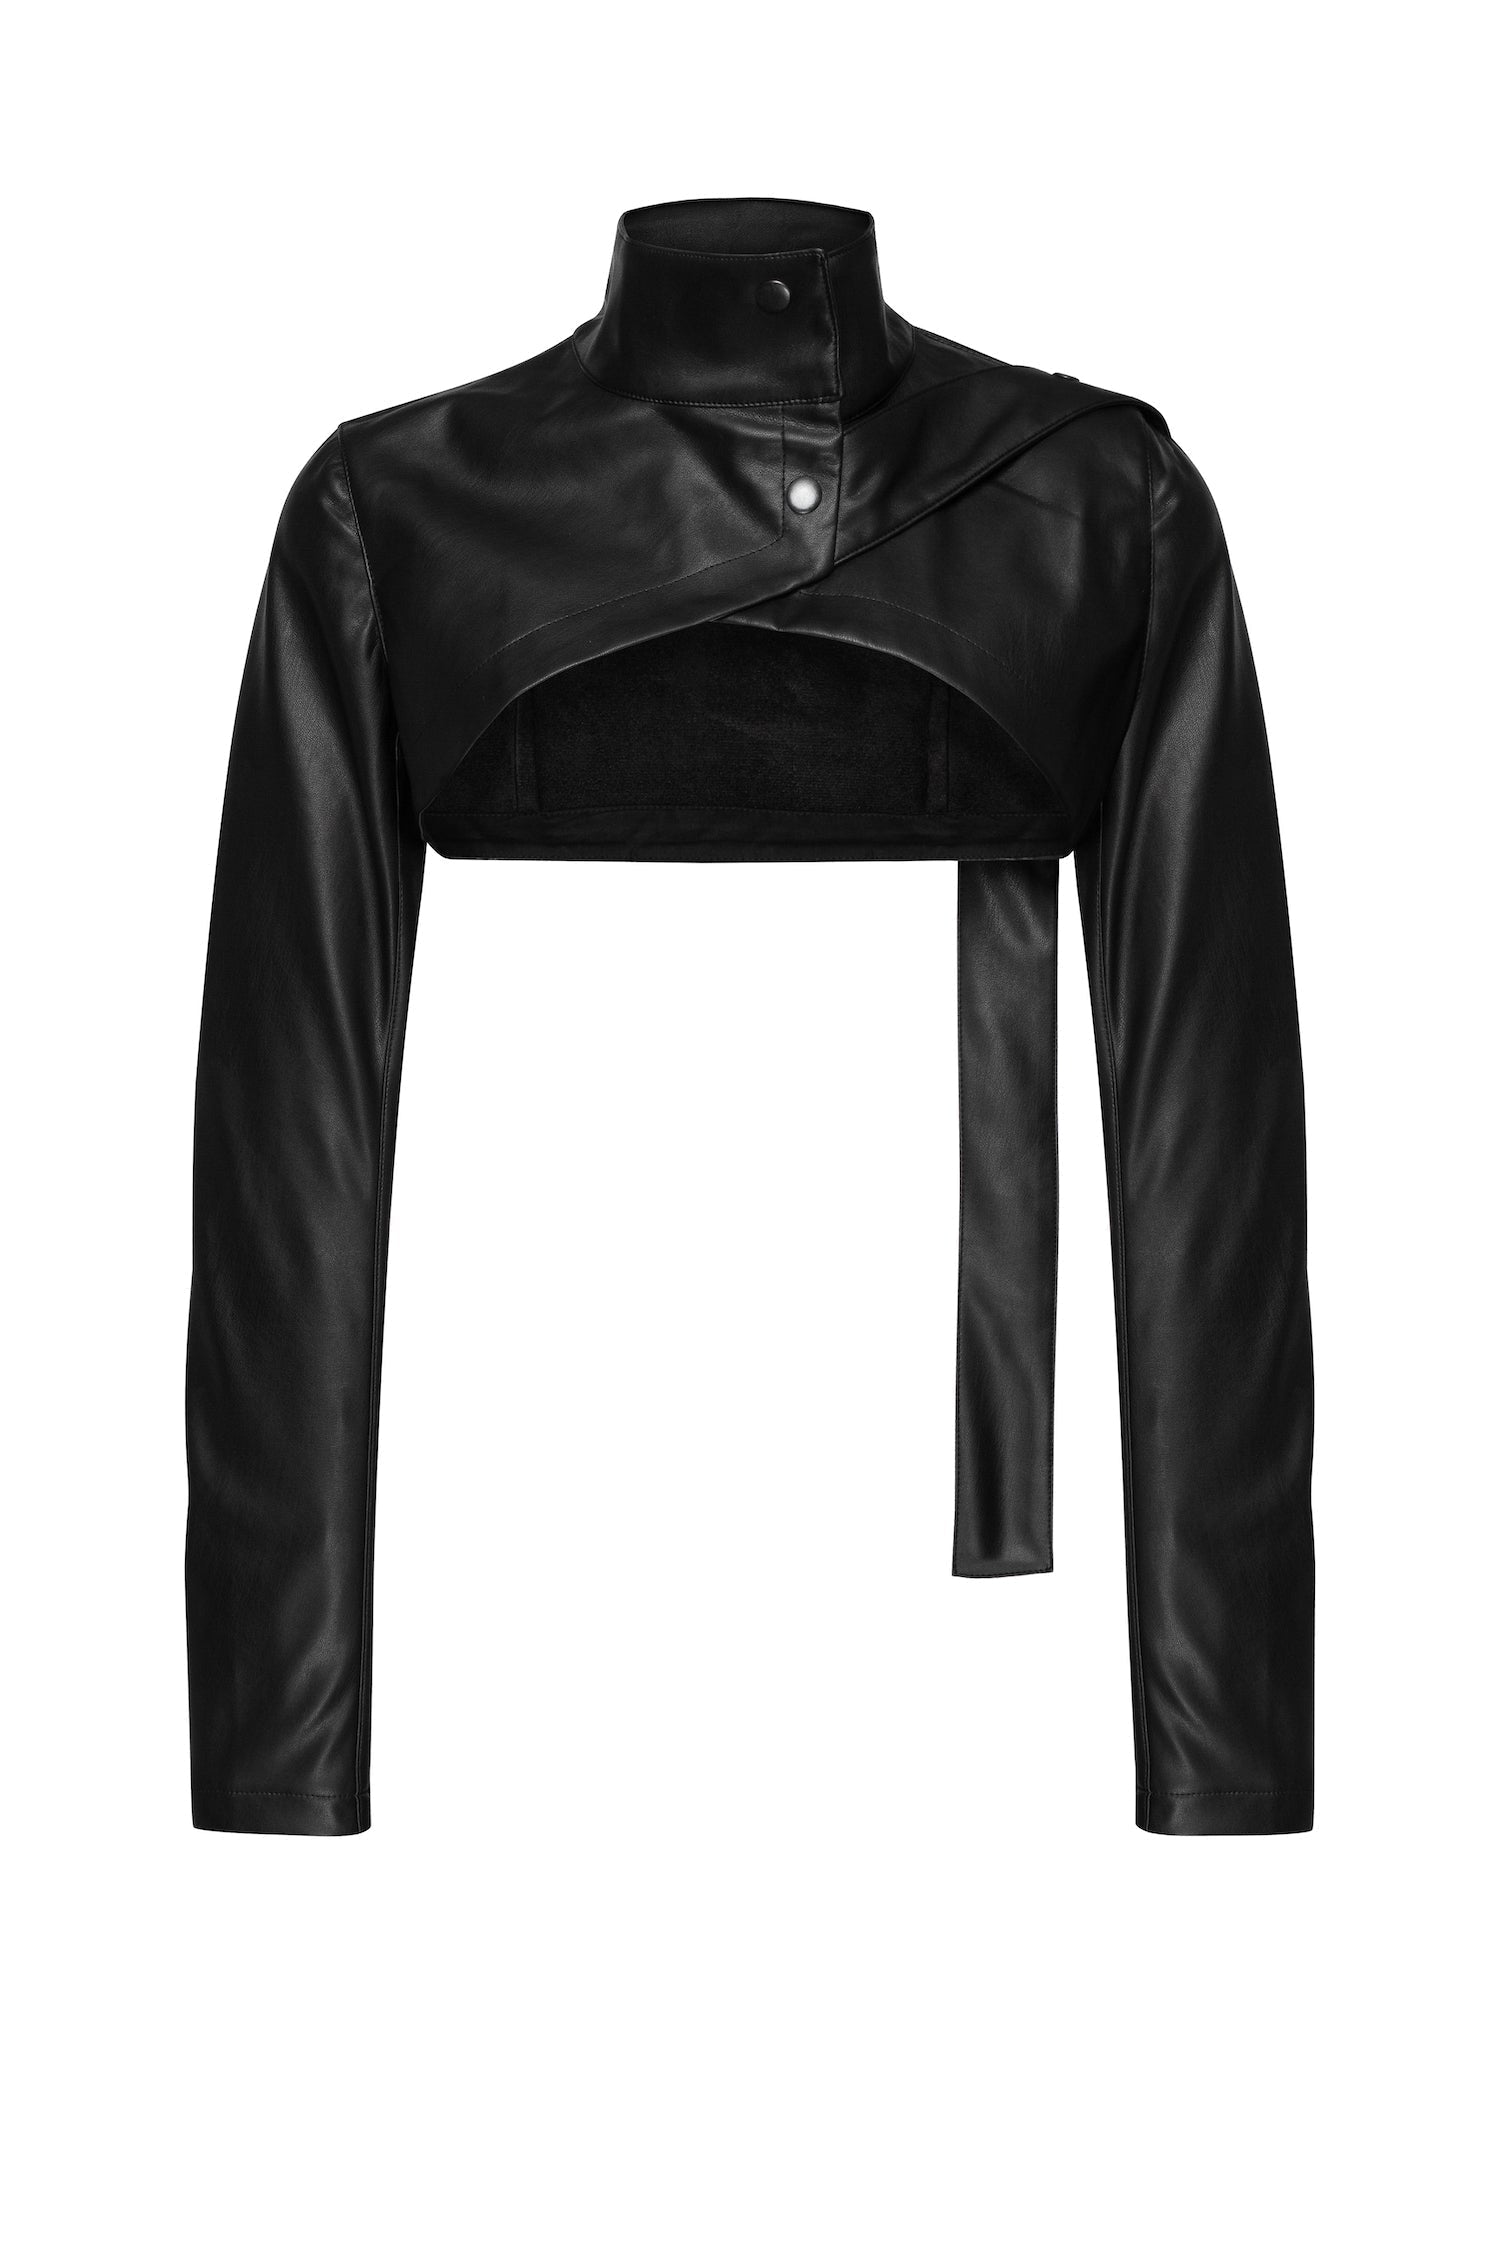 Branded clothes for women - Buy sustainable clothing - Gothic women's ...